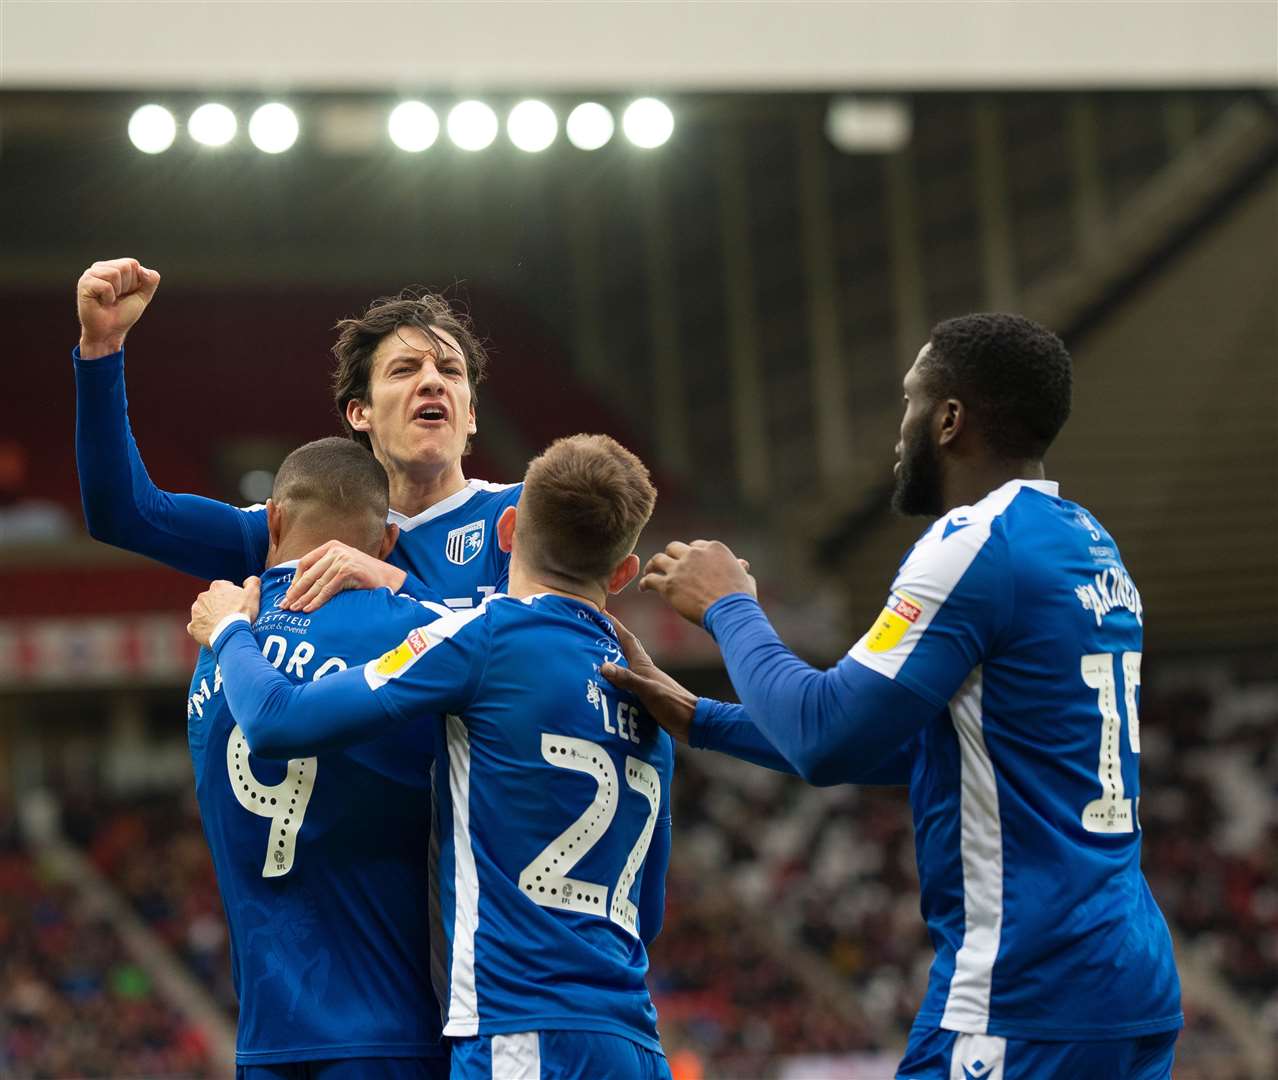 Alfie Jones and the Gills celebrate a goal against Sunderland in the last game of the season